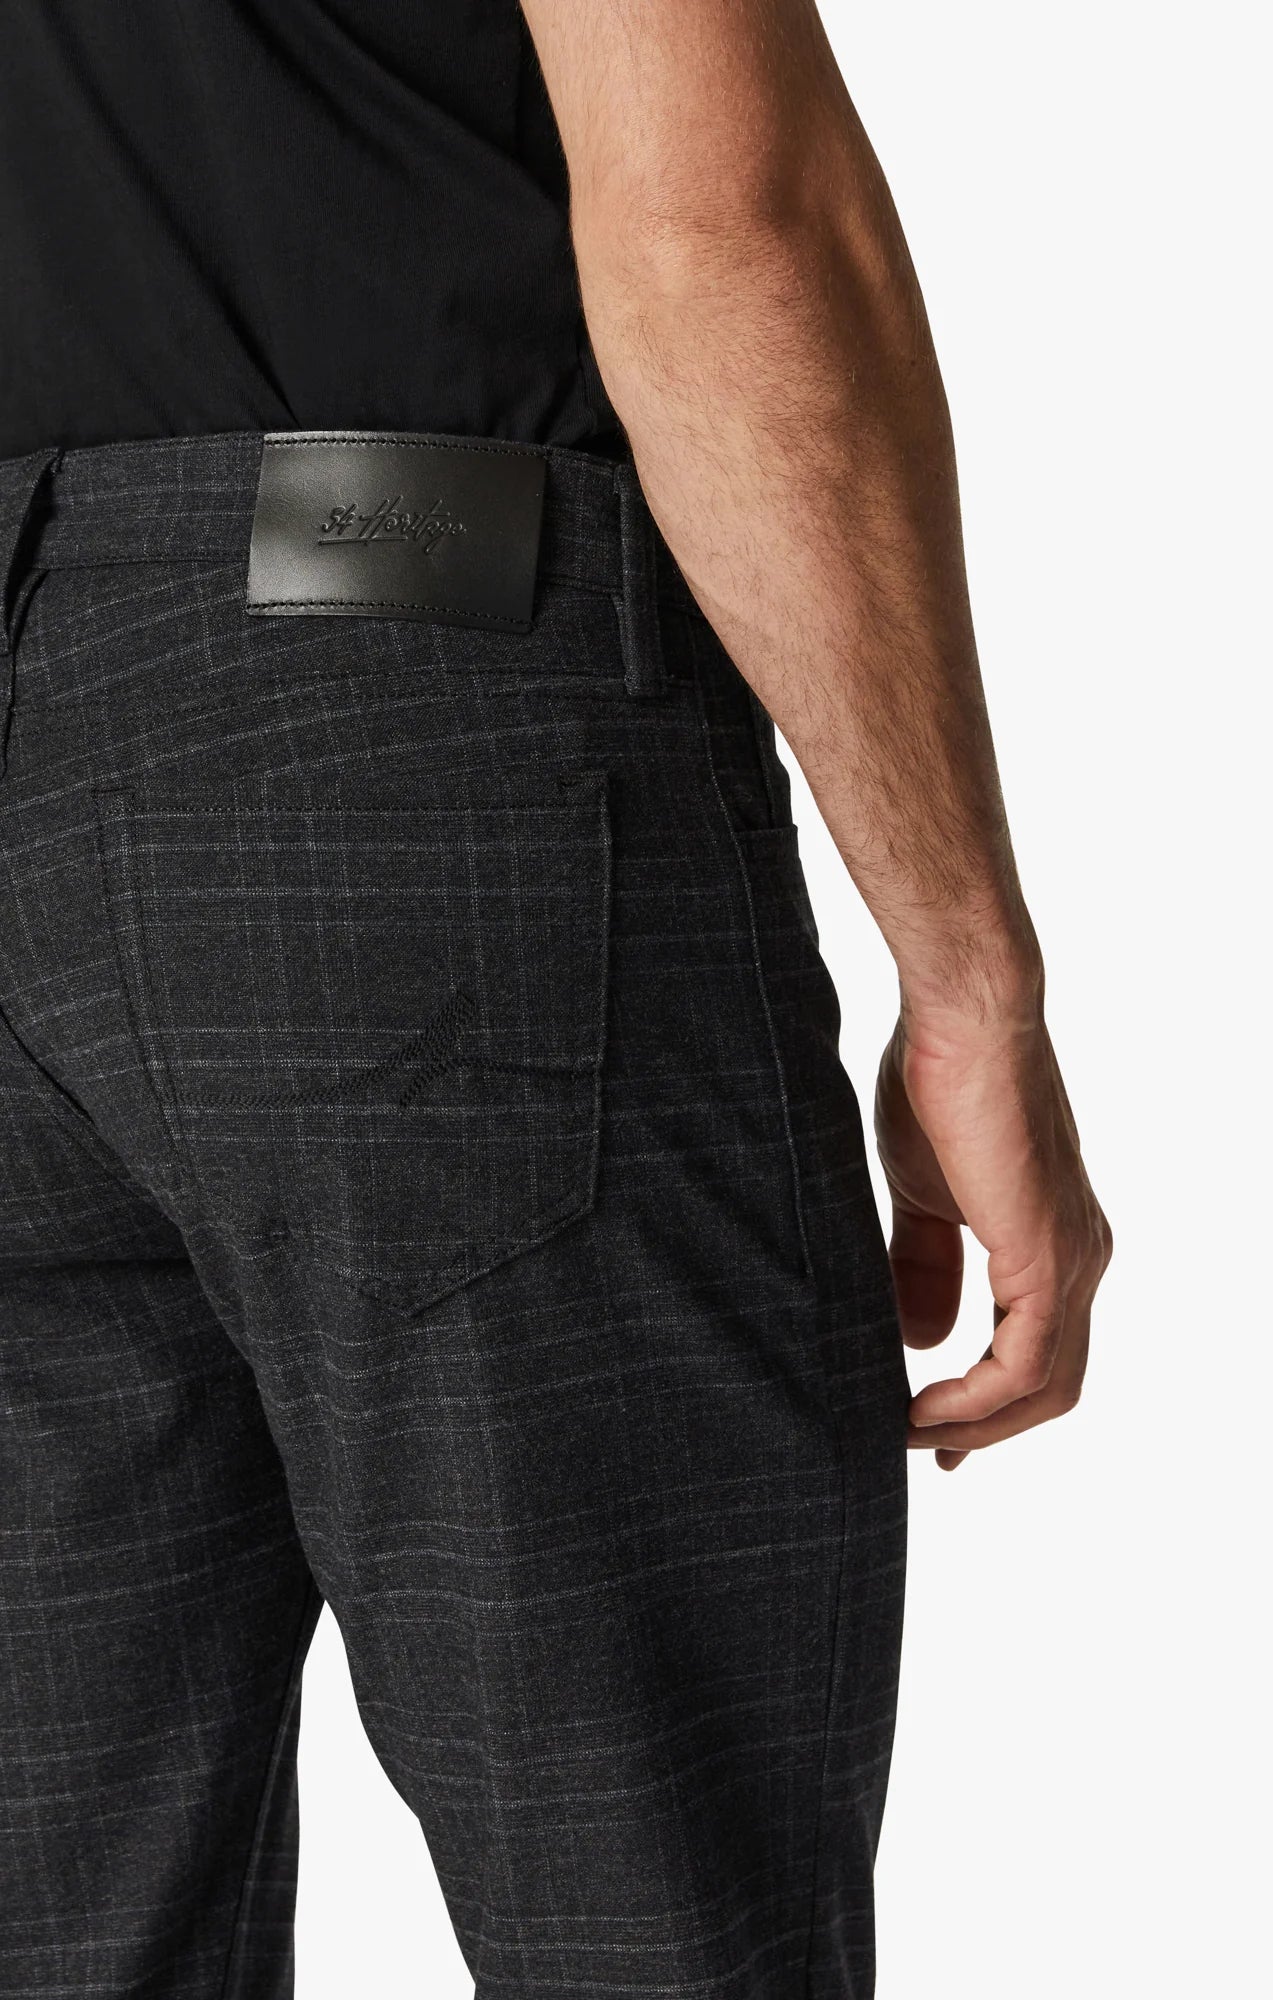 34 Heritage - Courage Grey Checked - Pants-Men&#39;s Pants-Yaletown-Vancouver-Surrey-Canada